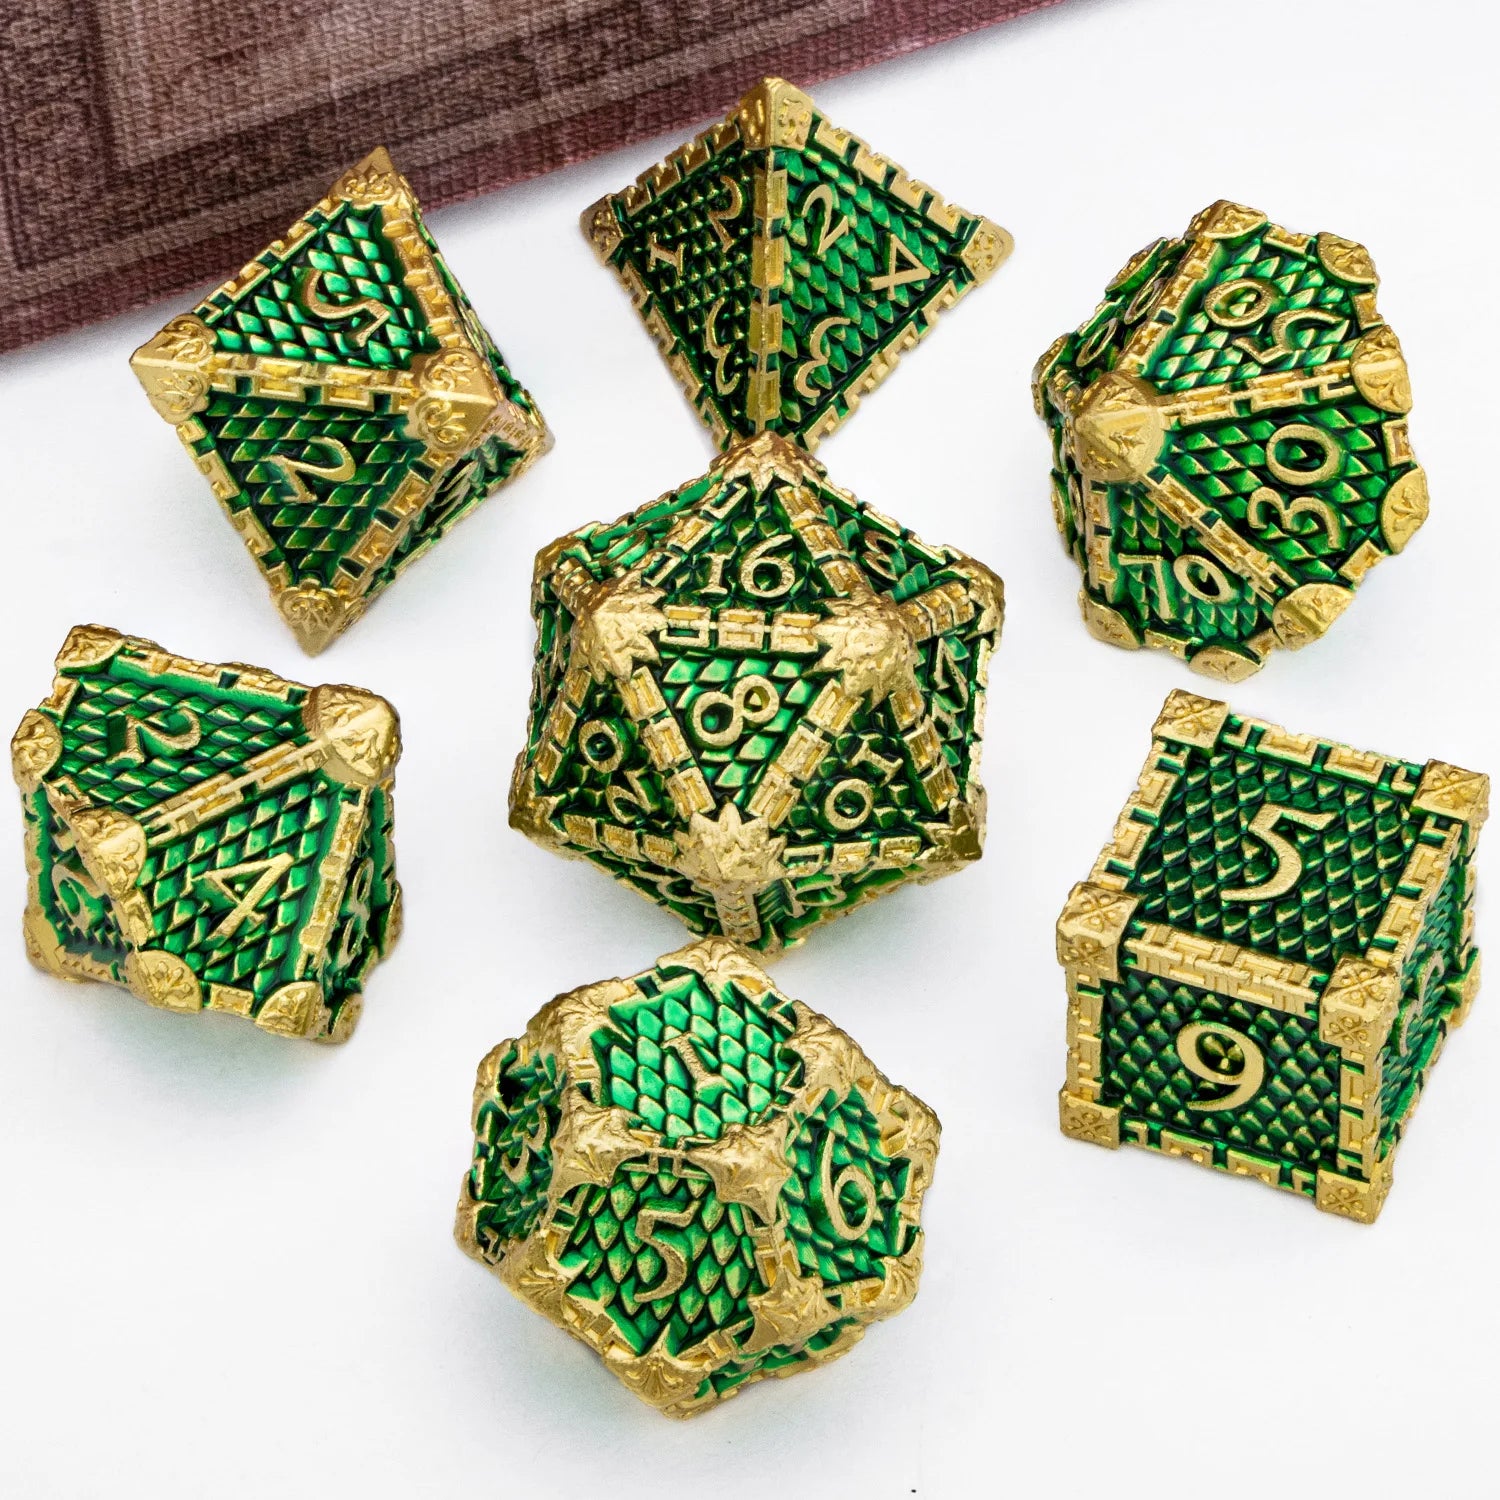 DND Metal Dice Set Dragon Scale Blood D&D Dice Dungeon and Dragon Role Playing Games Polyhedral Dice RPG D and D Dice Golden Green